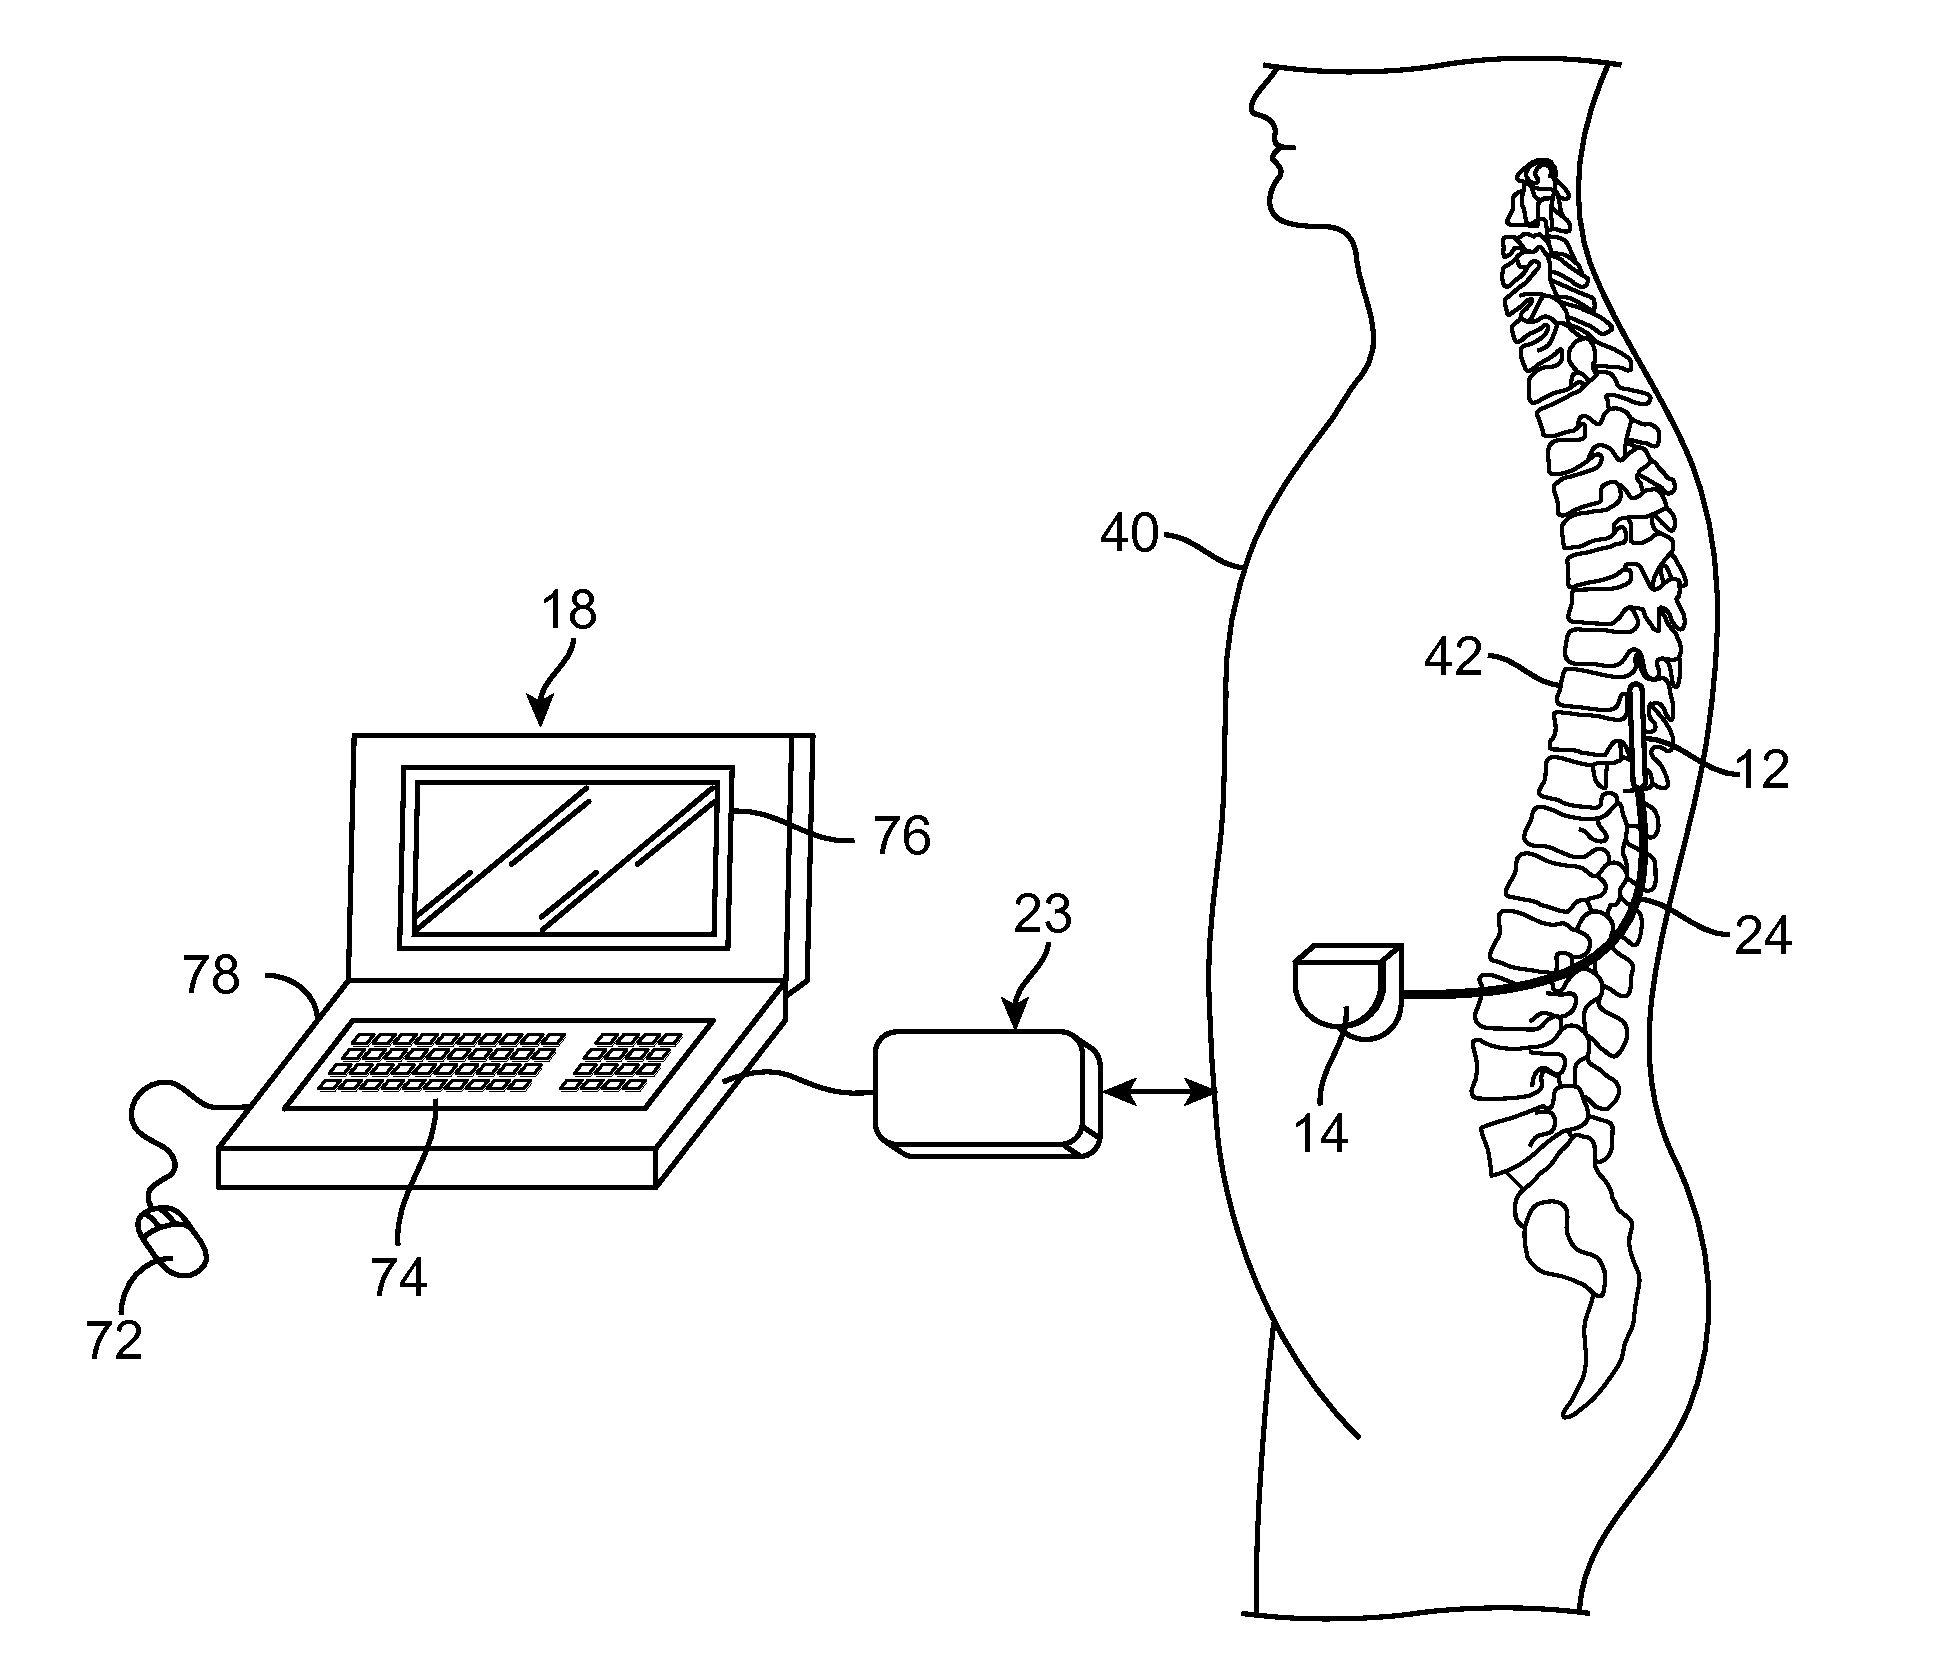 System and method for programming neurostimulation devices using cached plug-in software drivers